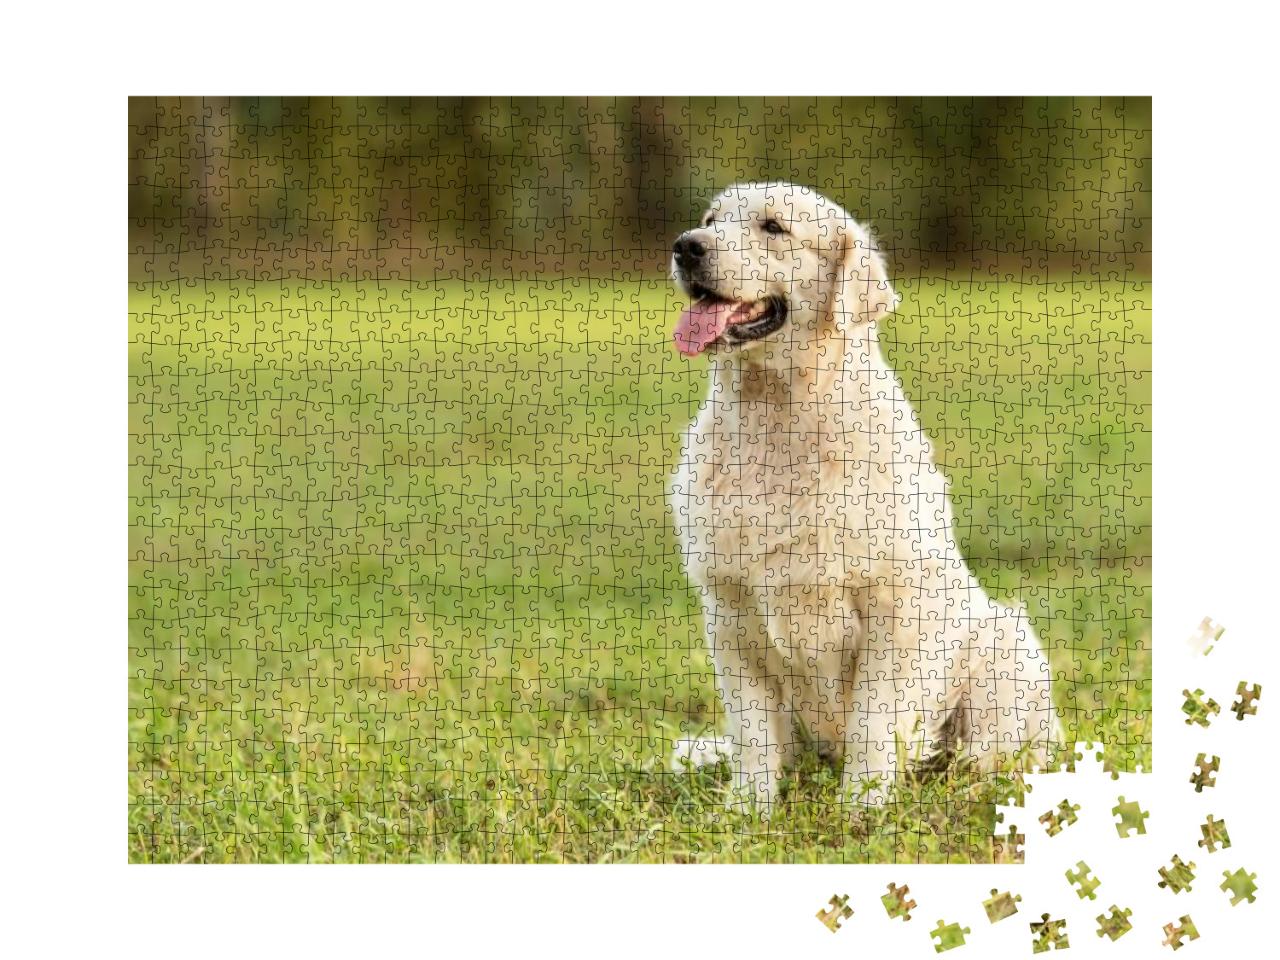 Beauty Golden Retriever Dog in the Park... Jigsaw Puzzle with 1000 pieces